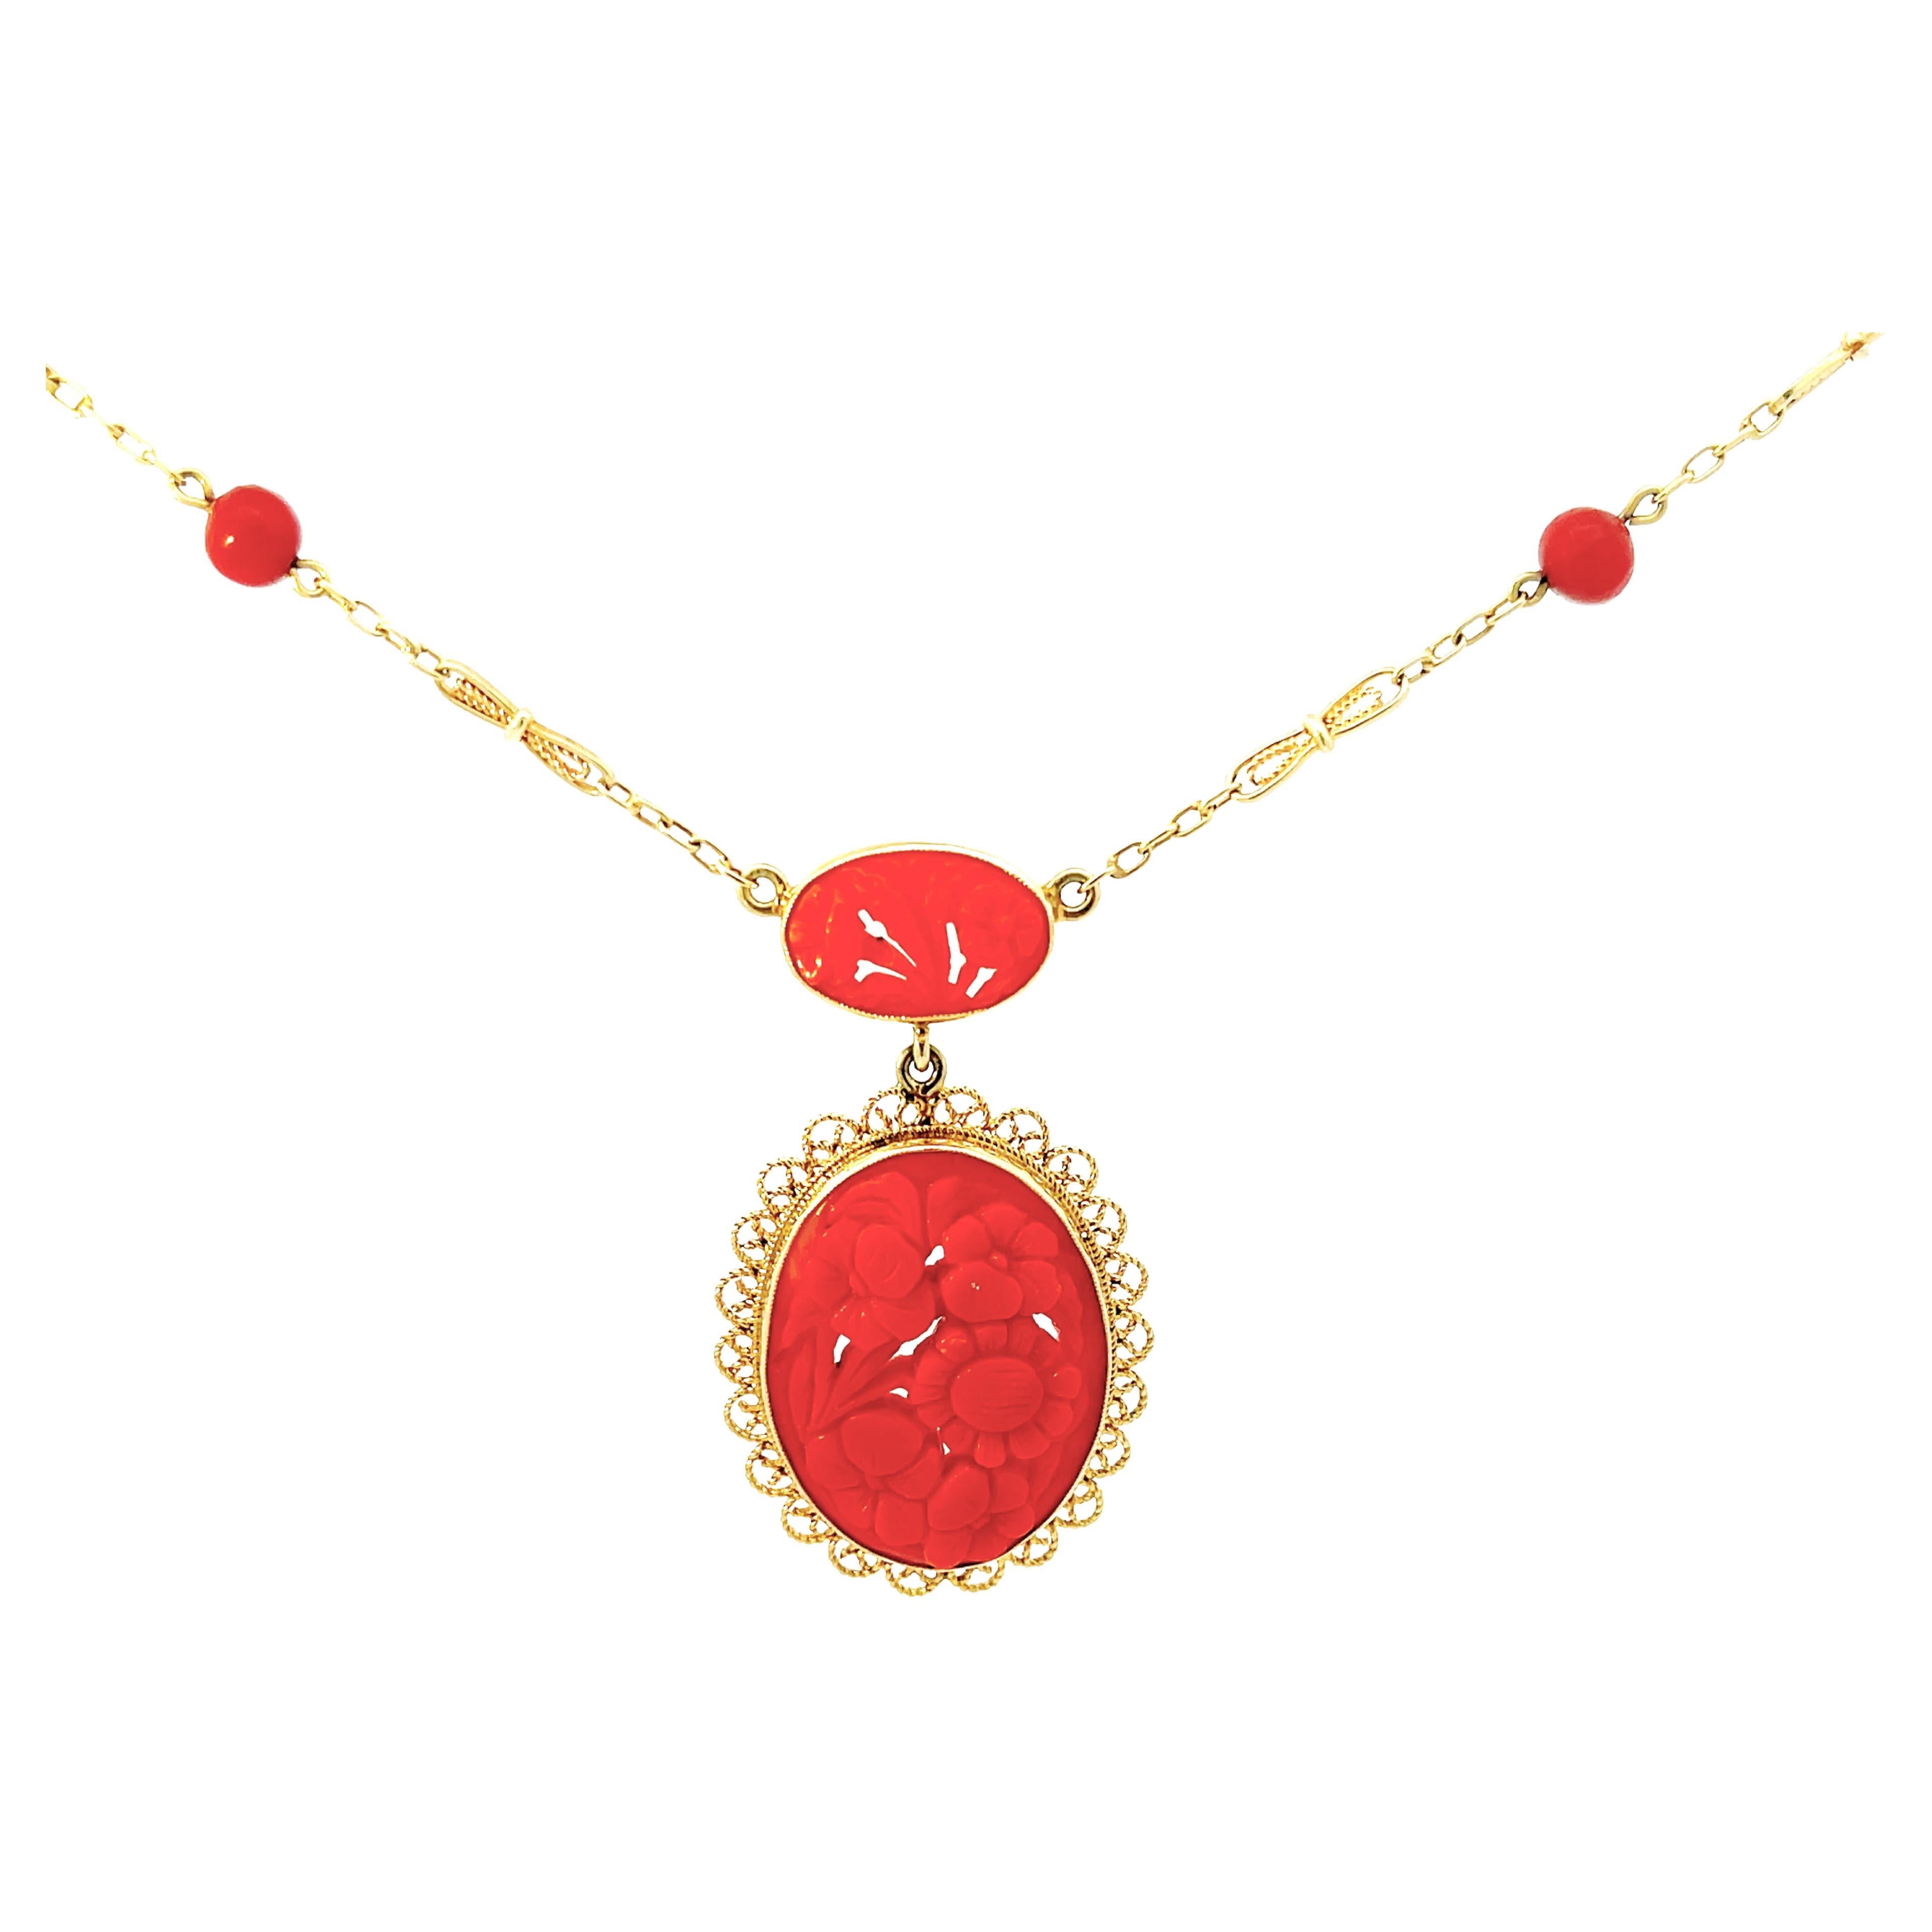 Vintage Carved Red Coral Necklace with Floral Design in 14K Yellow Gold